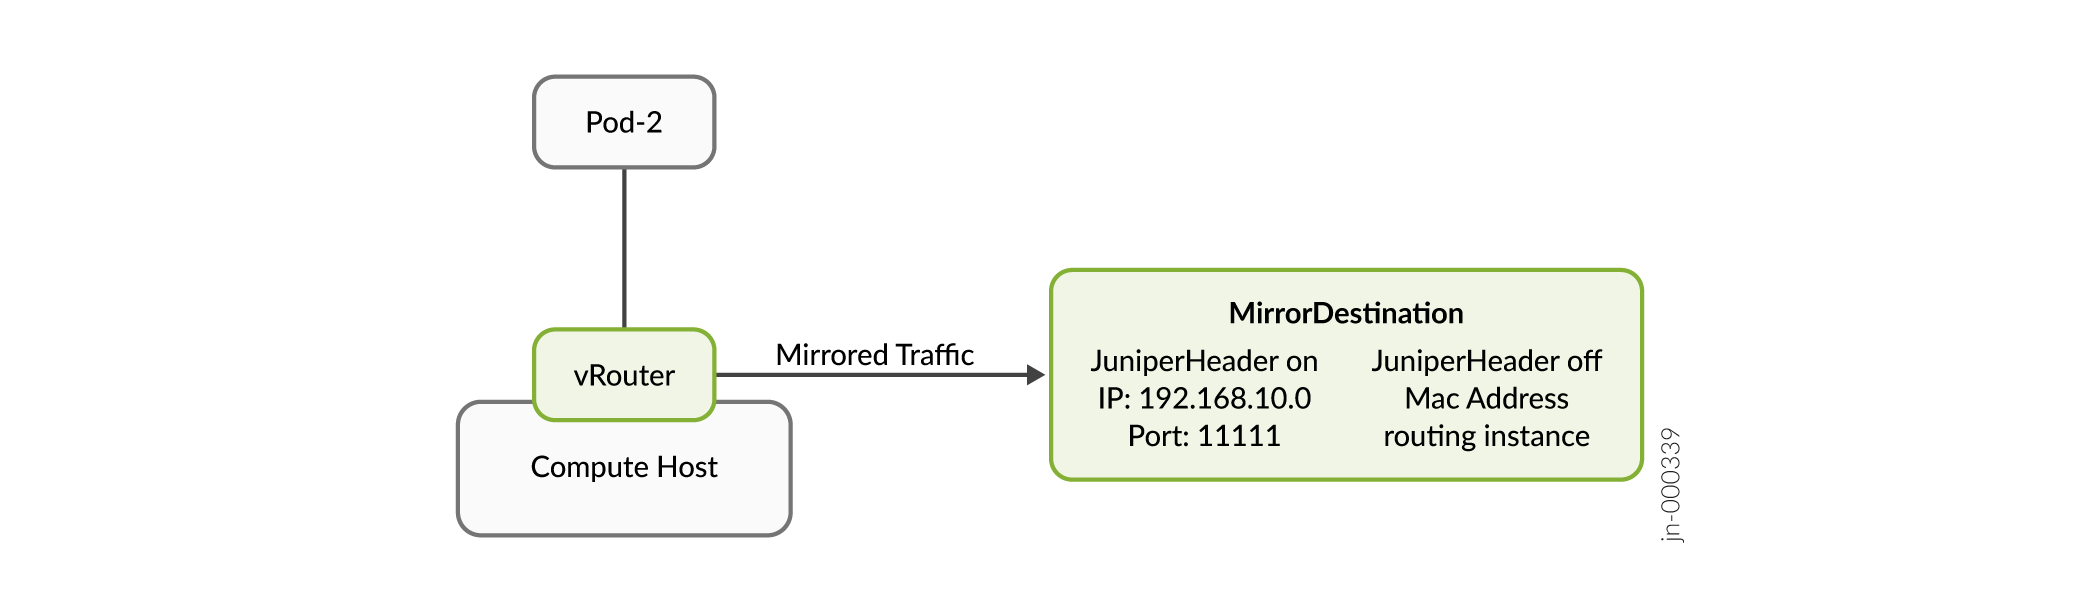 Cloud-Native Contrail Networking Port-Based Mirror Topology